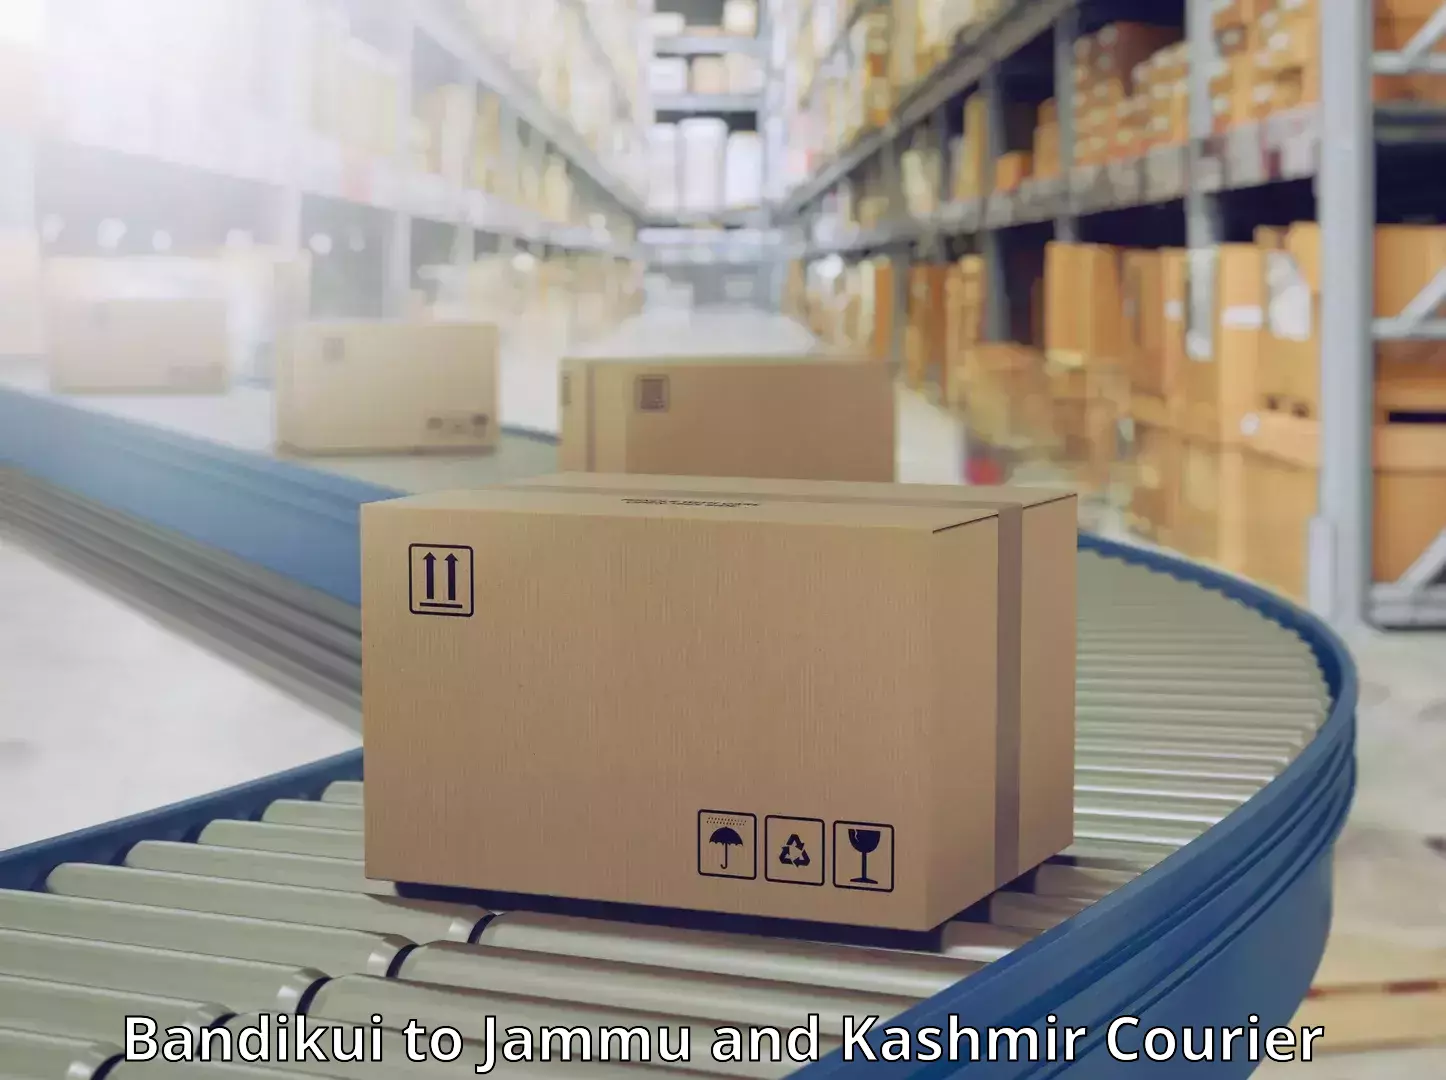 Full-service courier options in Bandikui to Jammu and Kashmir